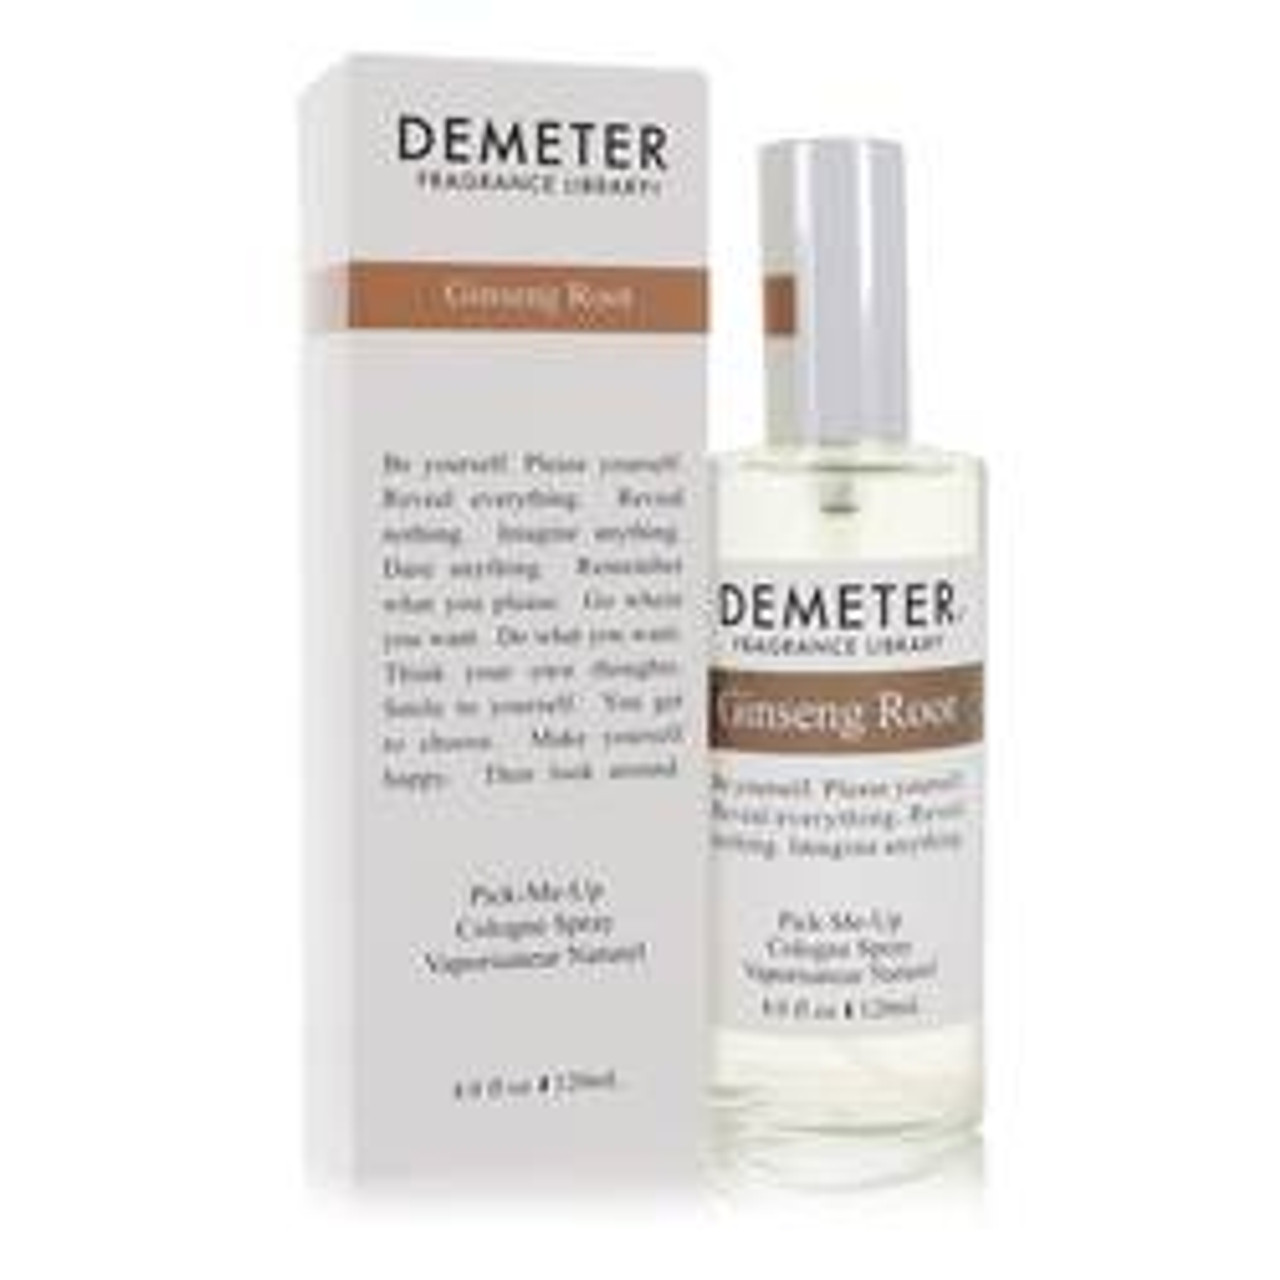 Demeter Ginseng Root Perfume By Demeter Cologne Spray 4 oz for Women - [From 79.50 - Choose pk Qty ] - *Ships from Miami